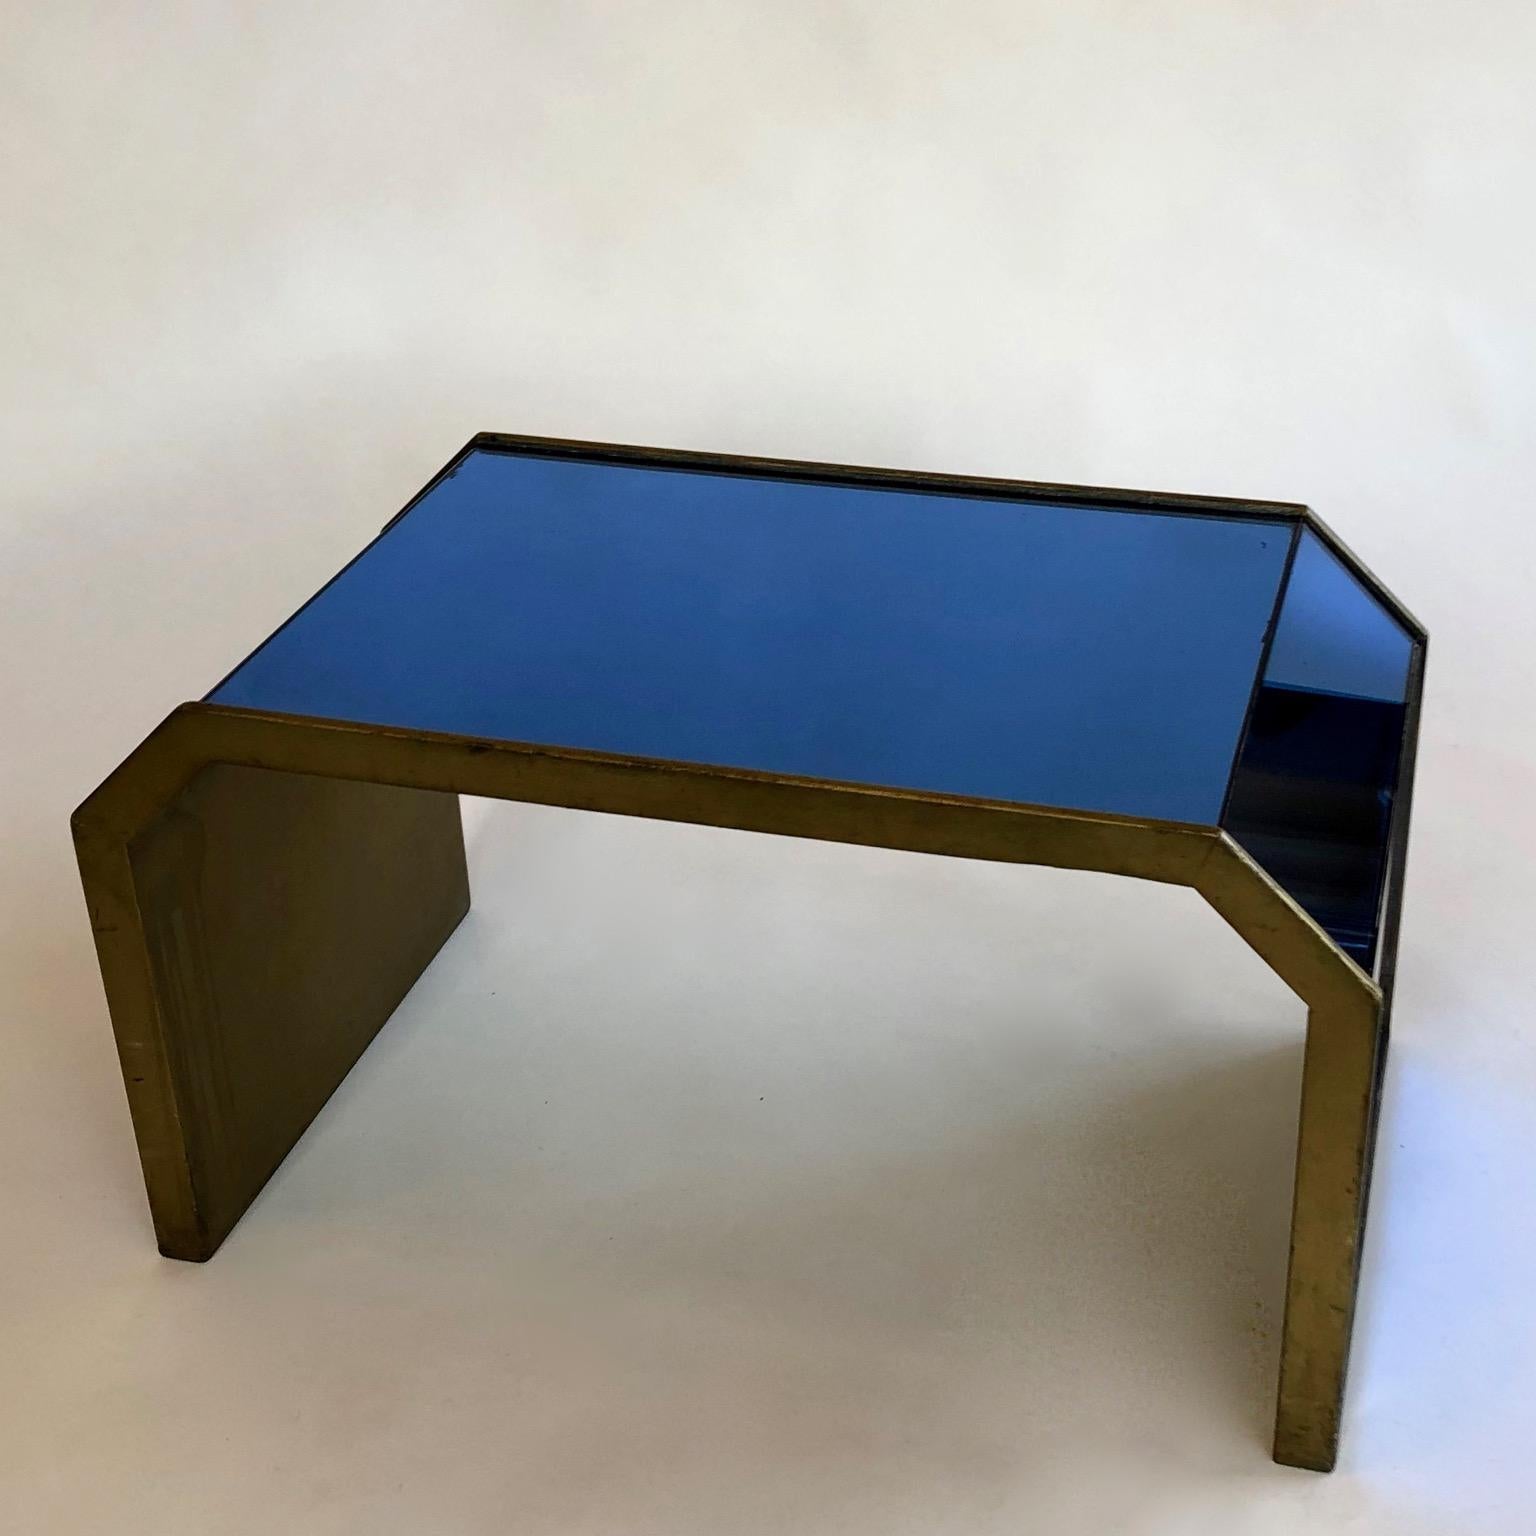 Gilt Art Deco blue mirrored side table with giltwood surround, 1920's to 1950's, UK For Sale